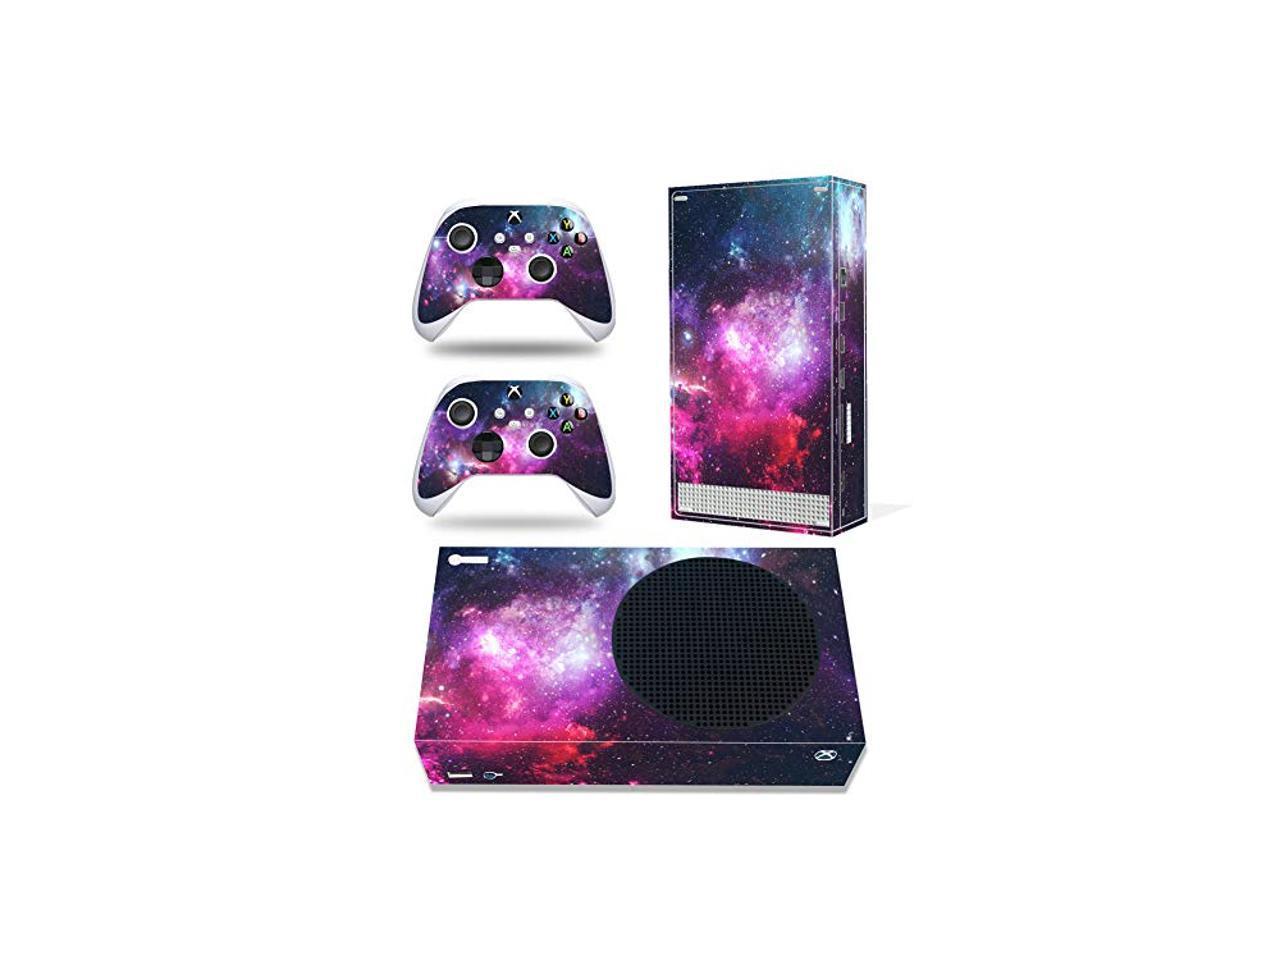 Purple Starry Sky Xbox Series X Skins Wrap Sticker with Two Free Wireless Controller Decals Whole Body Protective Vinyl Skin Decal Cover for Microsoft Xbox Series X Console 